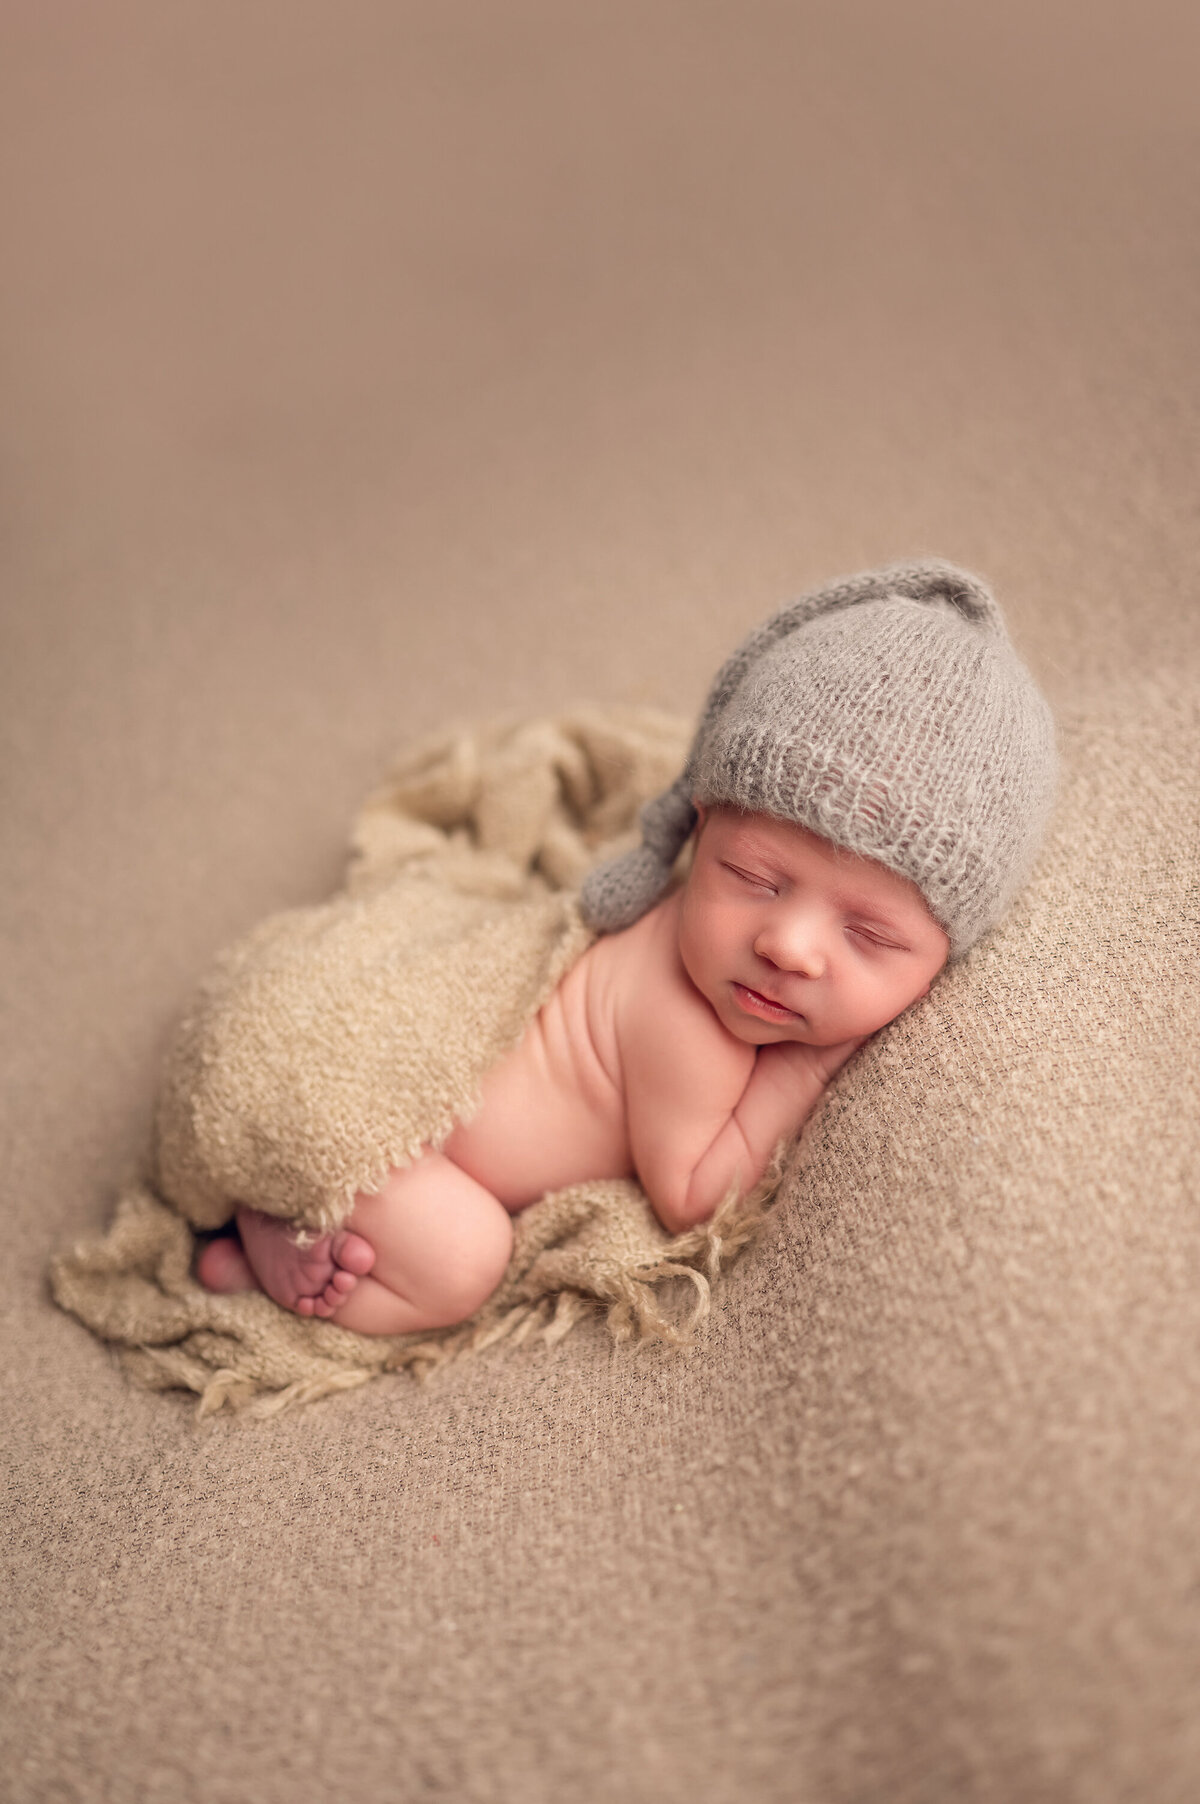 Portrait of a sleeping infant laying on a fuzzy beige background wearing a coordinating neutral hat and blanket.